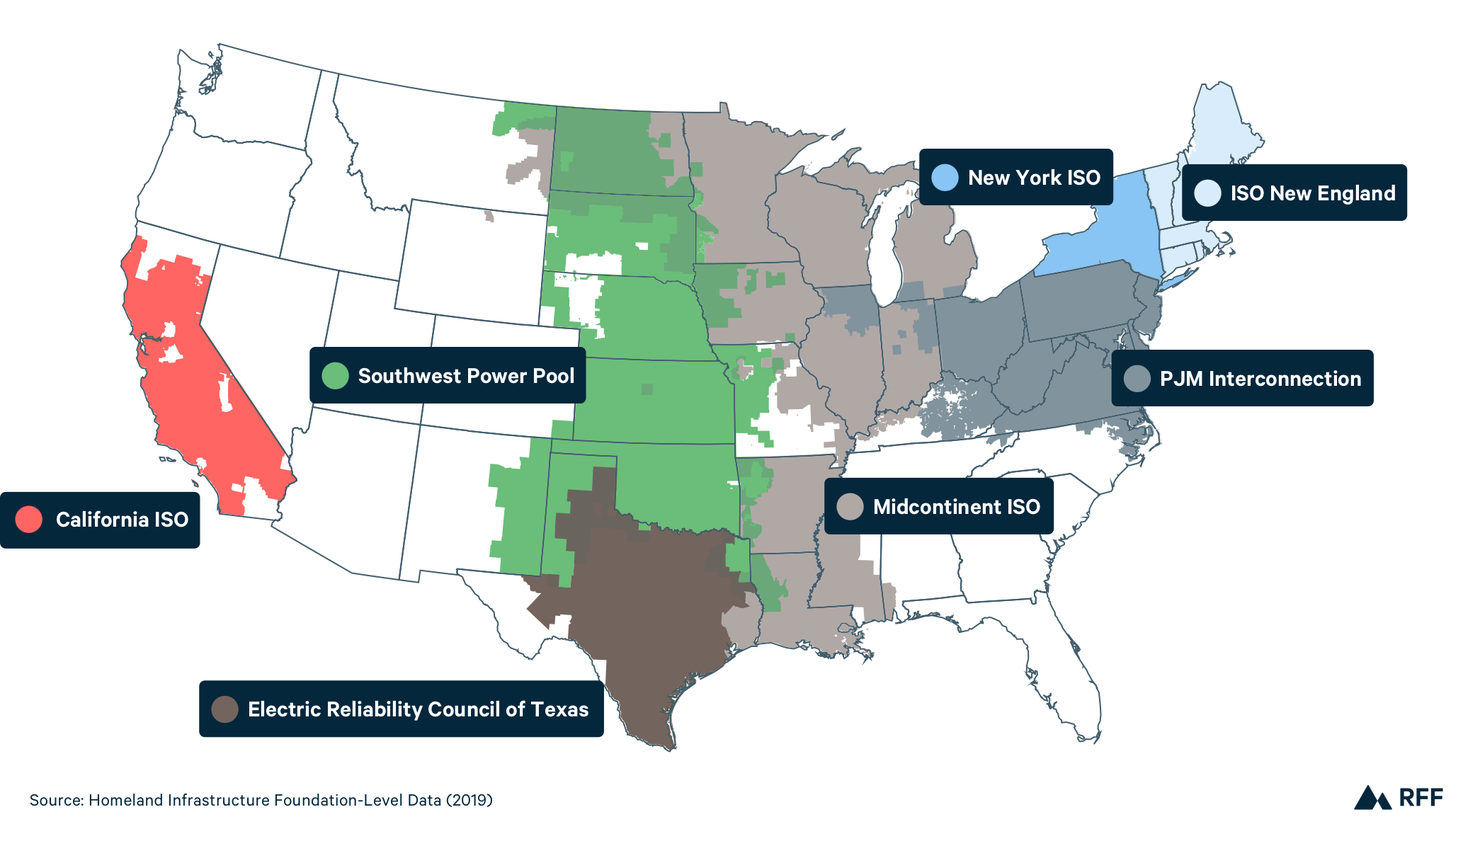 ISO/RTO operating power markets in the U.S.